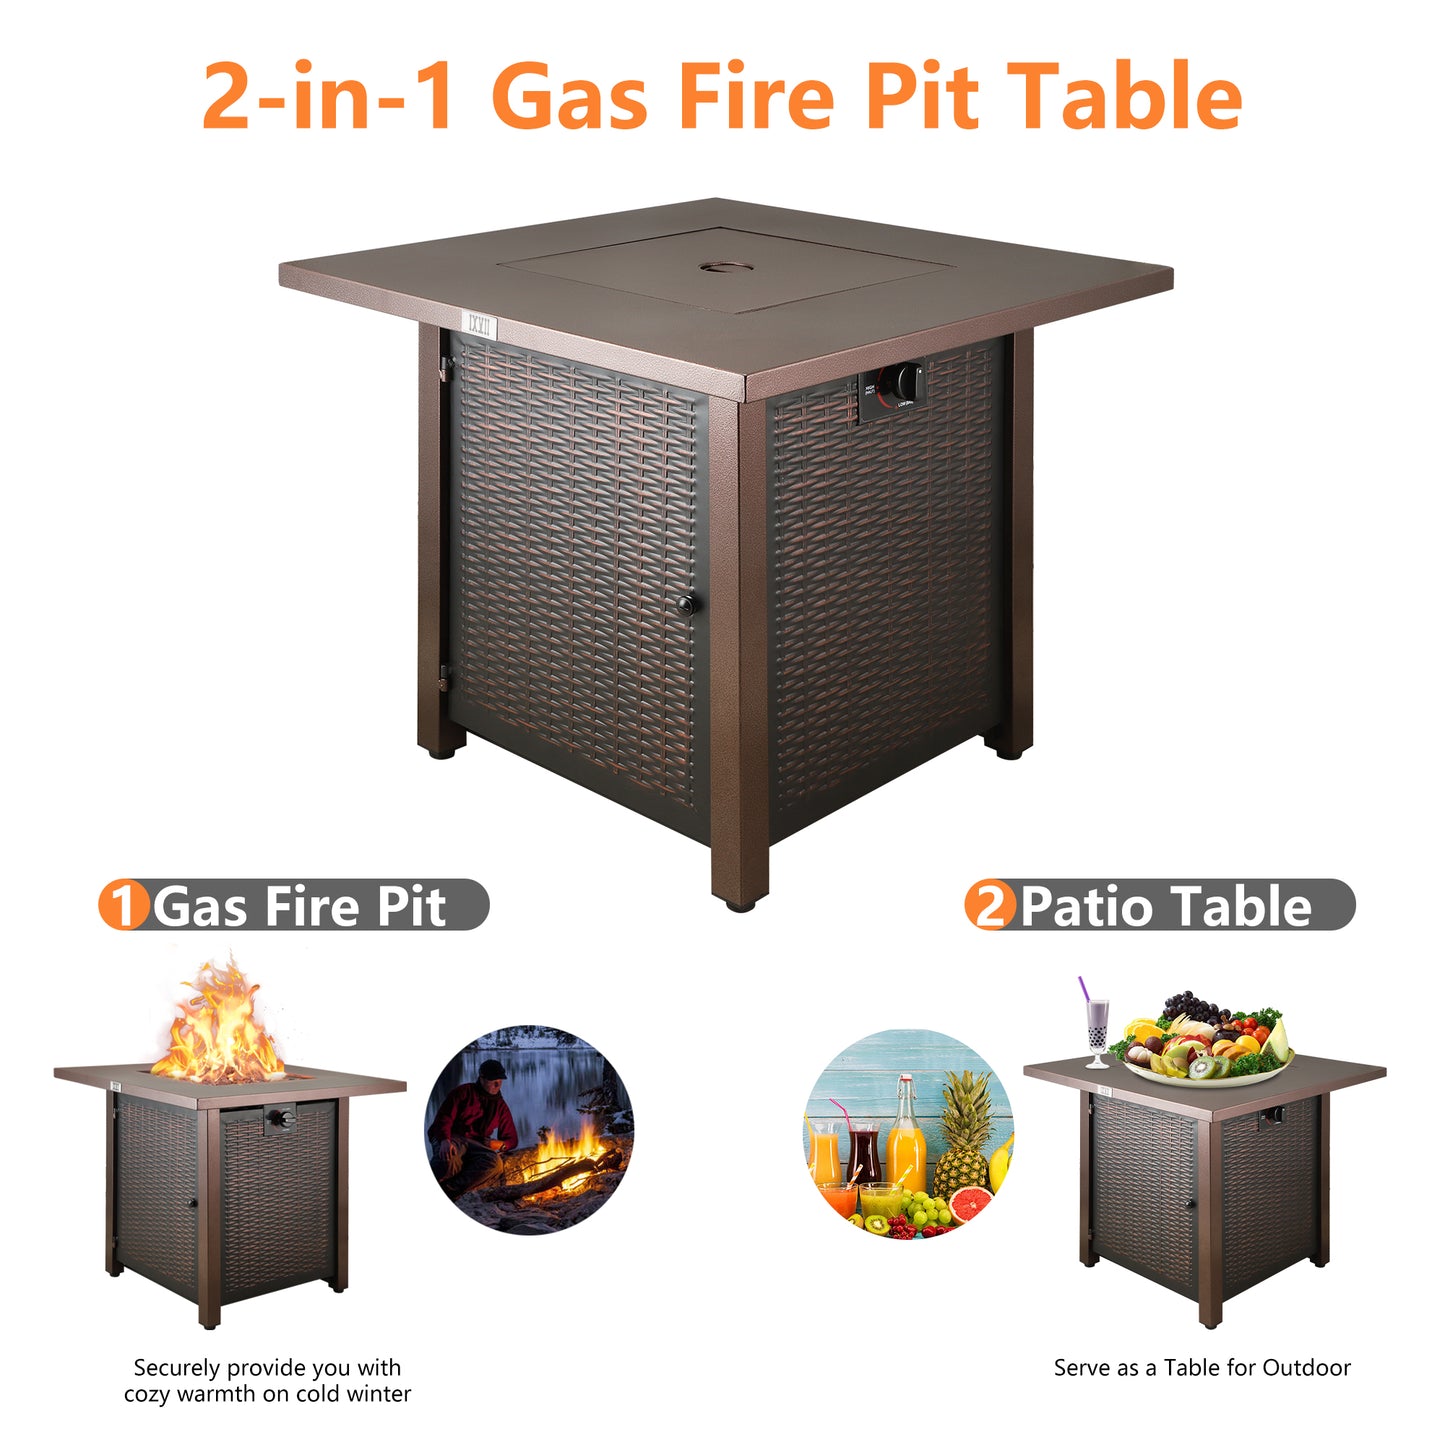 28 inch Outdoor Gas Fire Pit Table, 40,000 BTU Auto-Ignition Propane Fire Pit with Lid and Lava Rock, Outdoor 2-in-1 Propane Fire Pit Table, Table with Fire Pit, for Garden, Backyard, Patio, C09